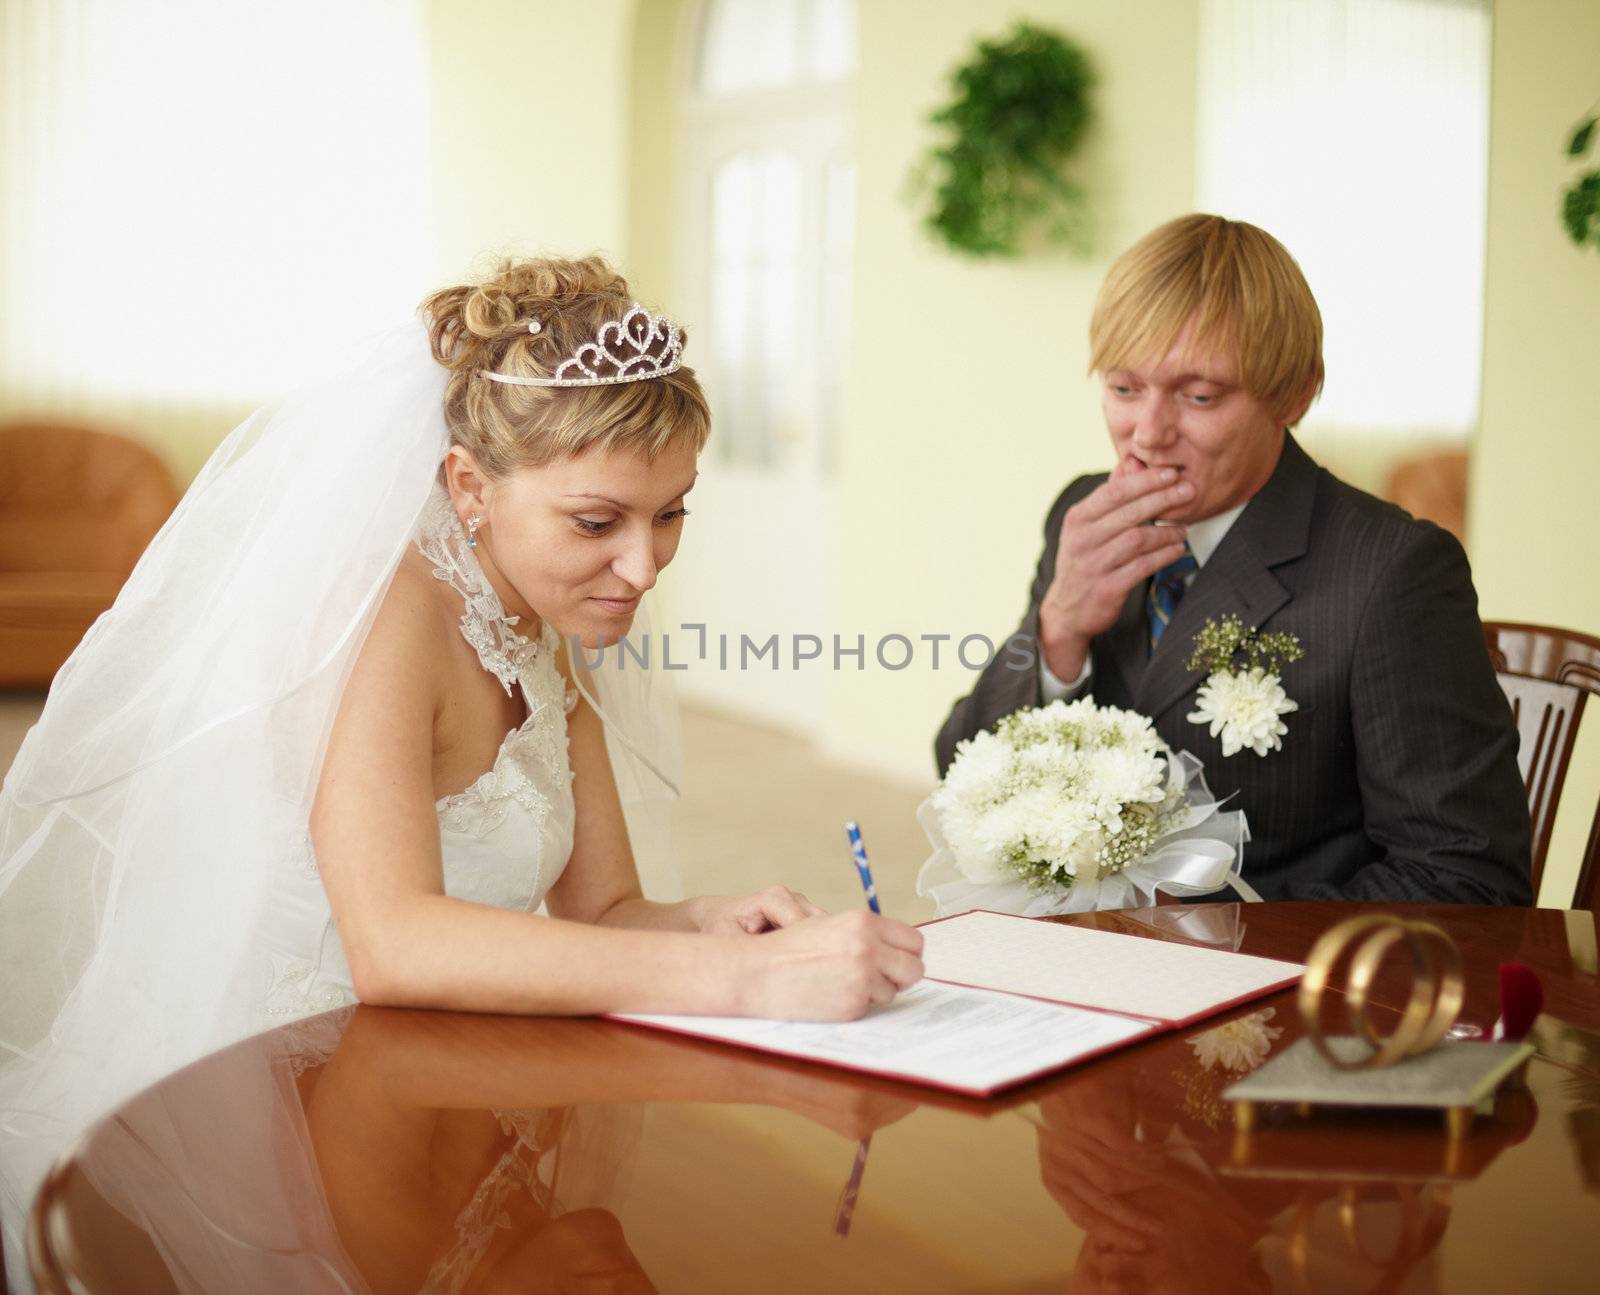 Registration of marriage. Groom in doubt. by pzaxe